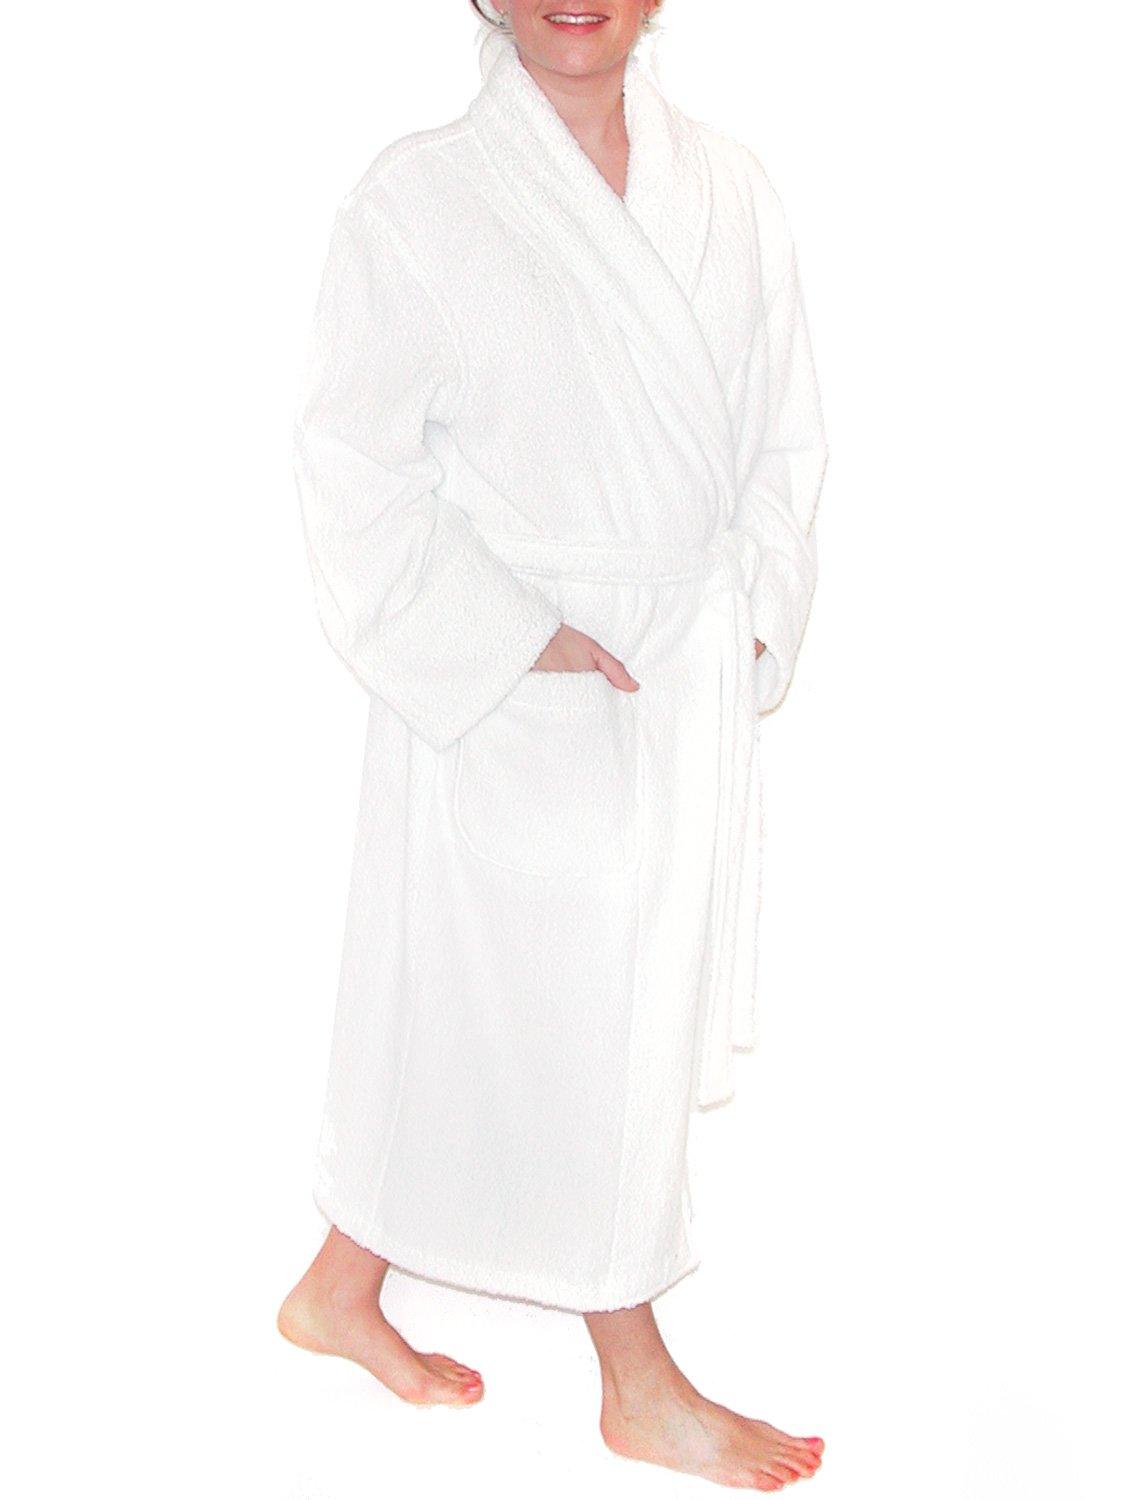 Shawl Collar Bathrobe for Adults made with Jalie sewing pattern #2567